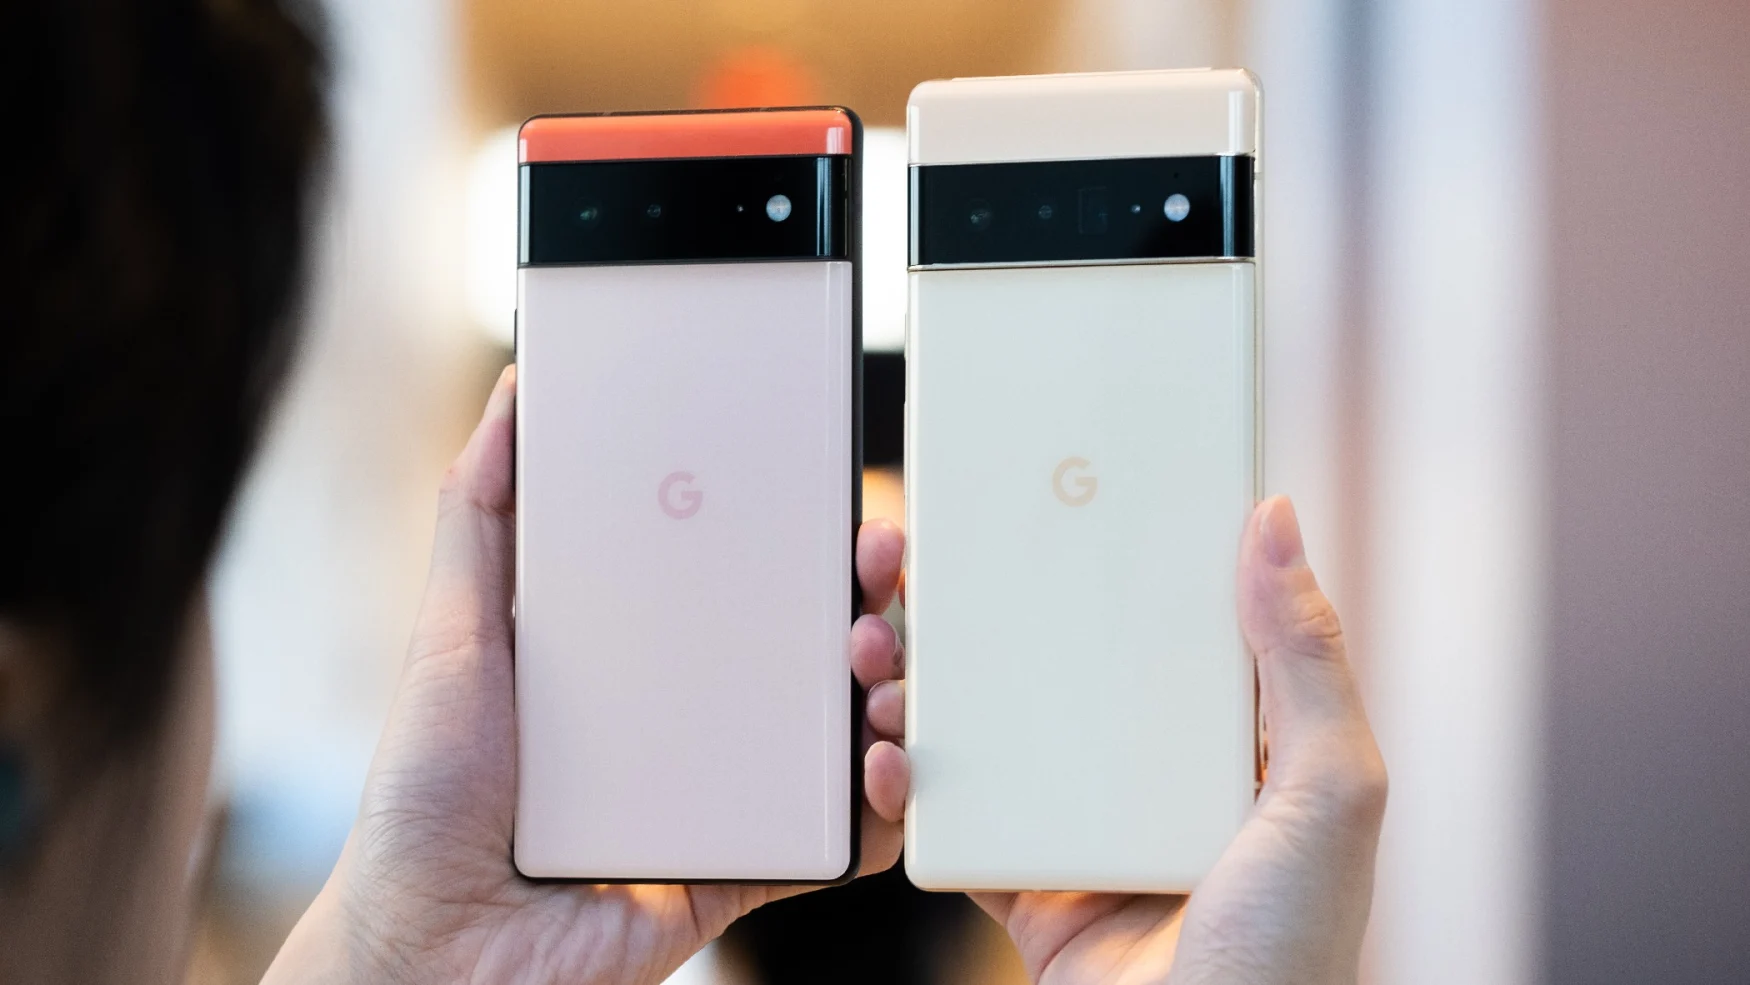 The Google Pixel 6 and 6 Pro held up in mid-air with their camera bars facing out.